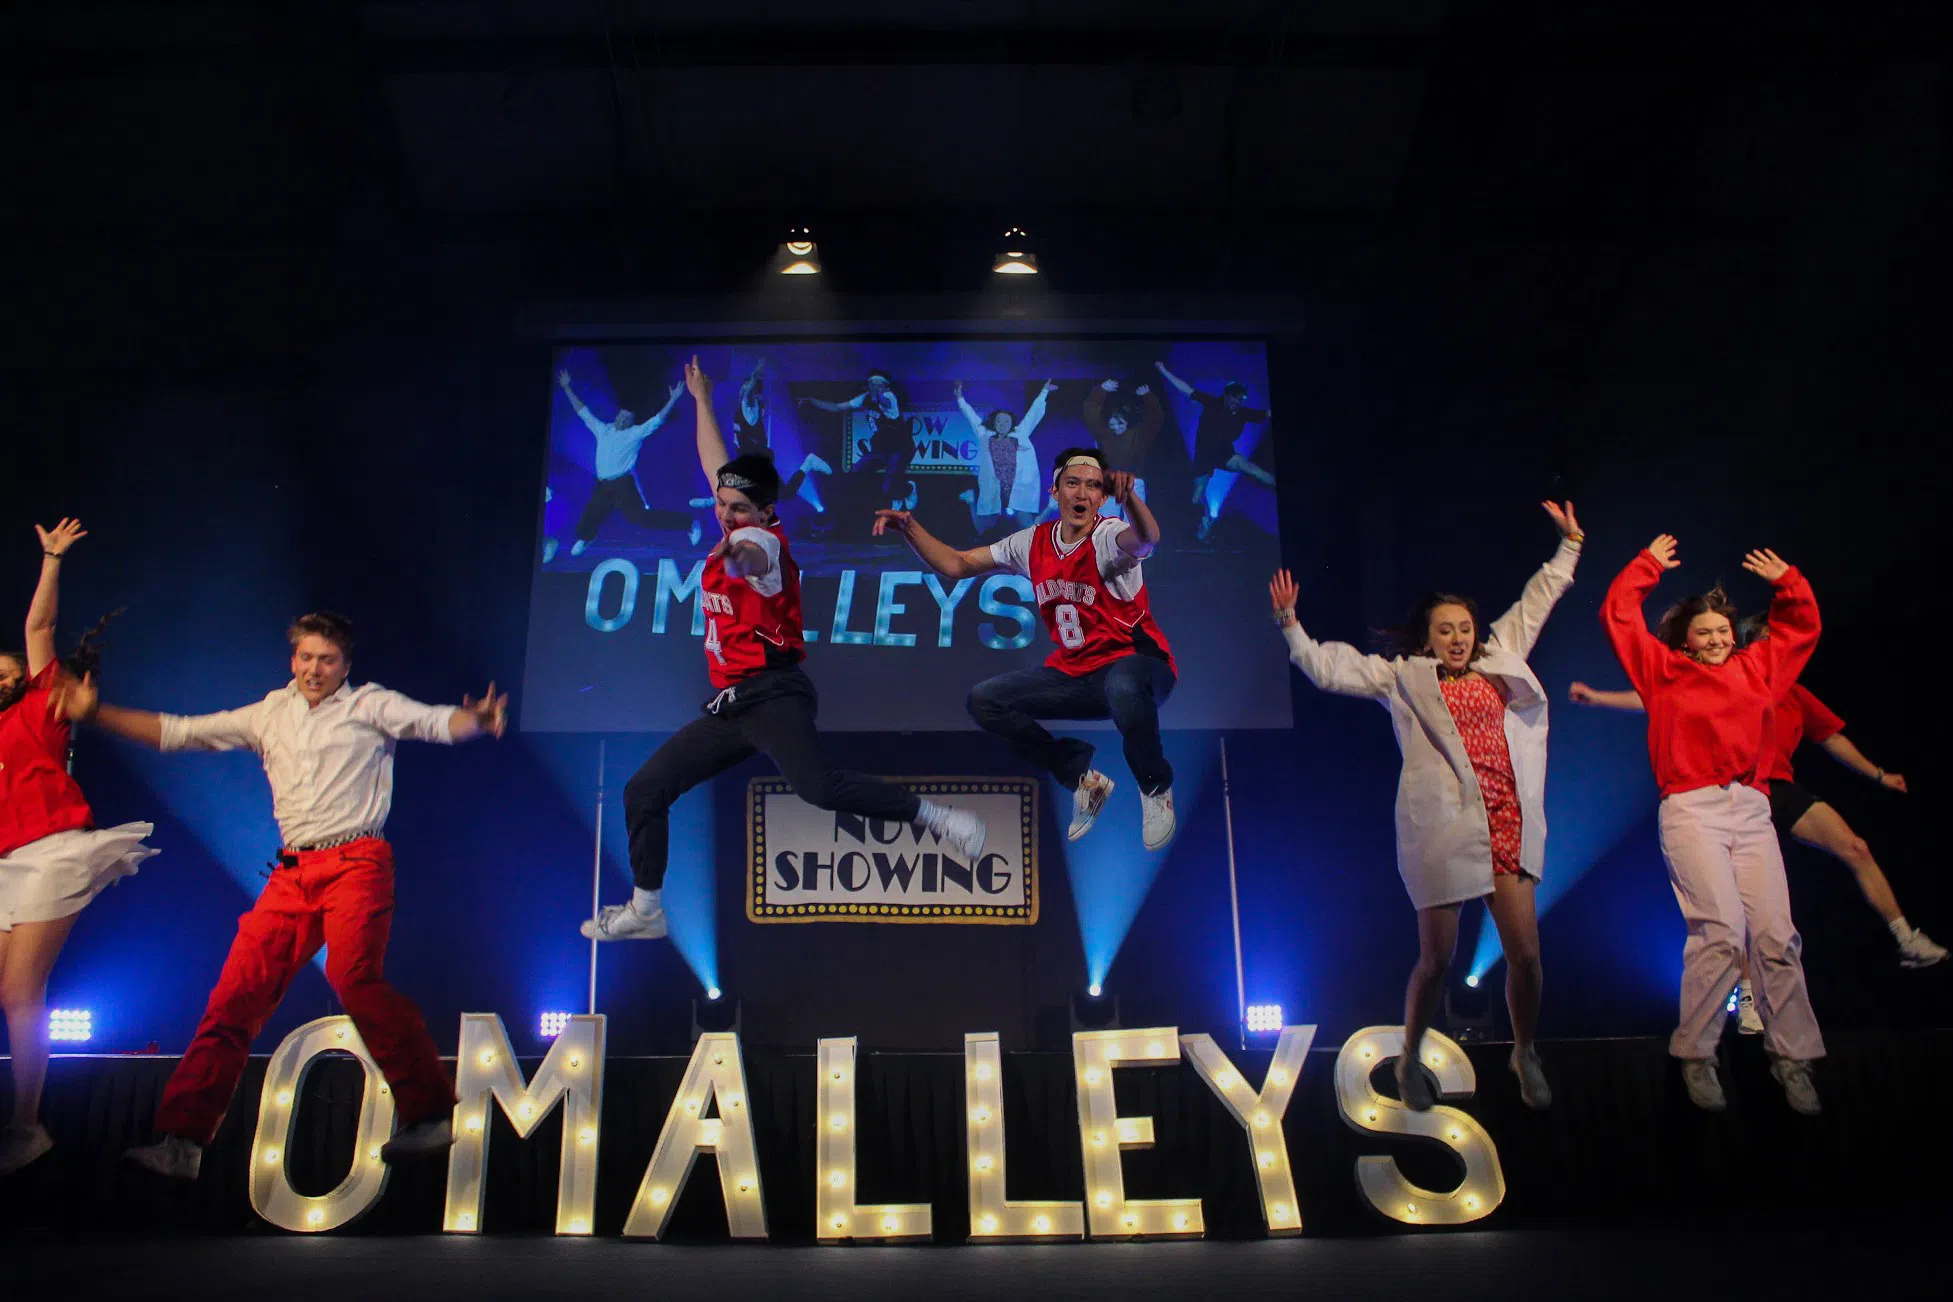 High School Musical themed cast jumping off stage with O'Malleys in bold lit up letters behind them